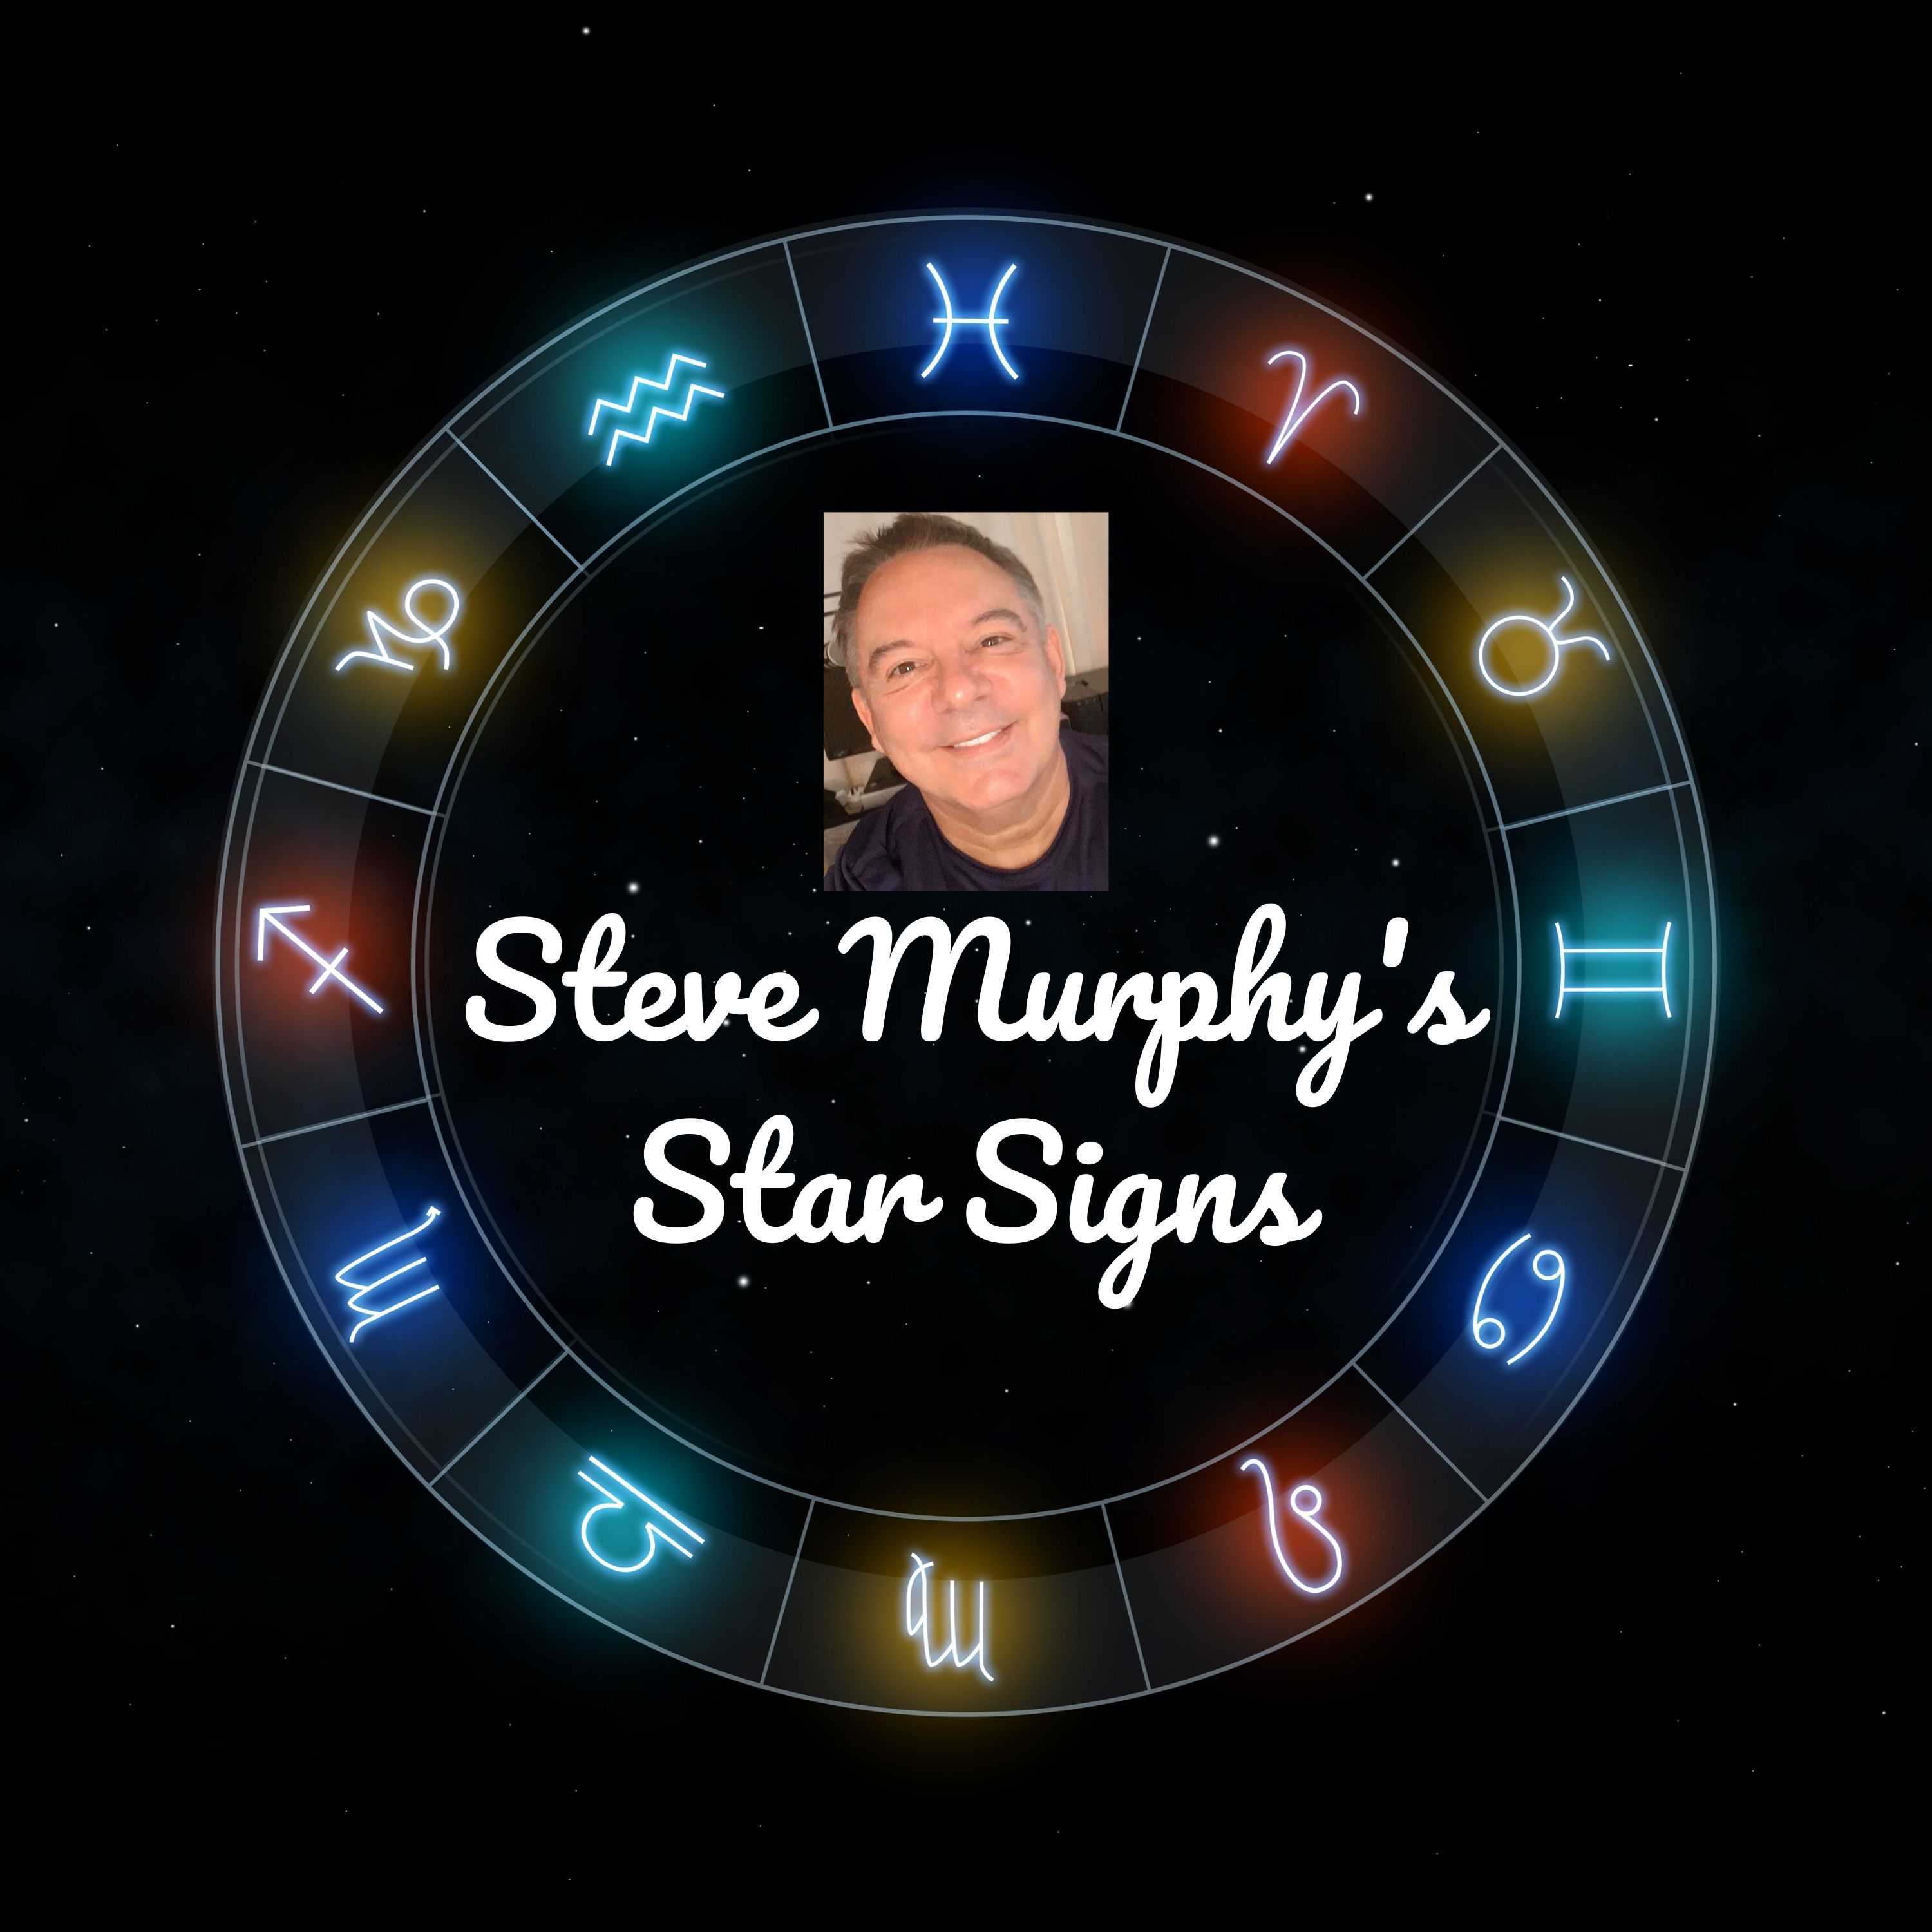 Your Star Signs For wc 3rd August 2020 | Astrology & Numerology Report